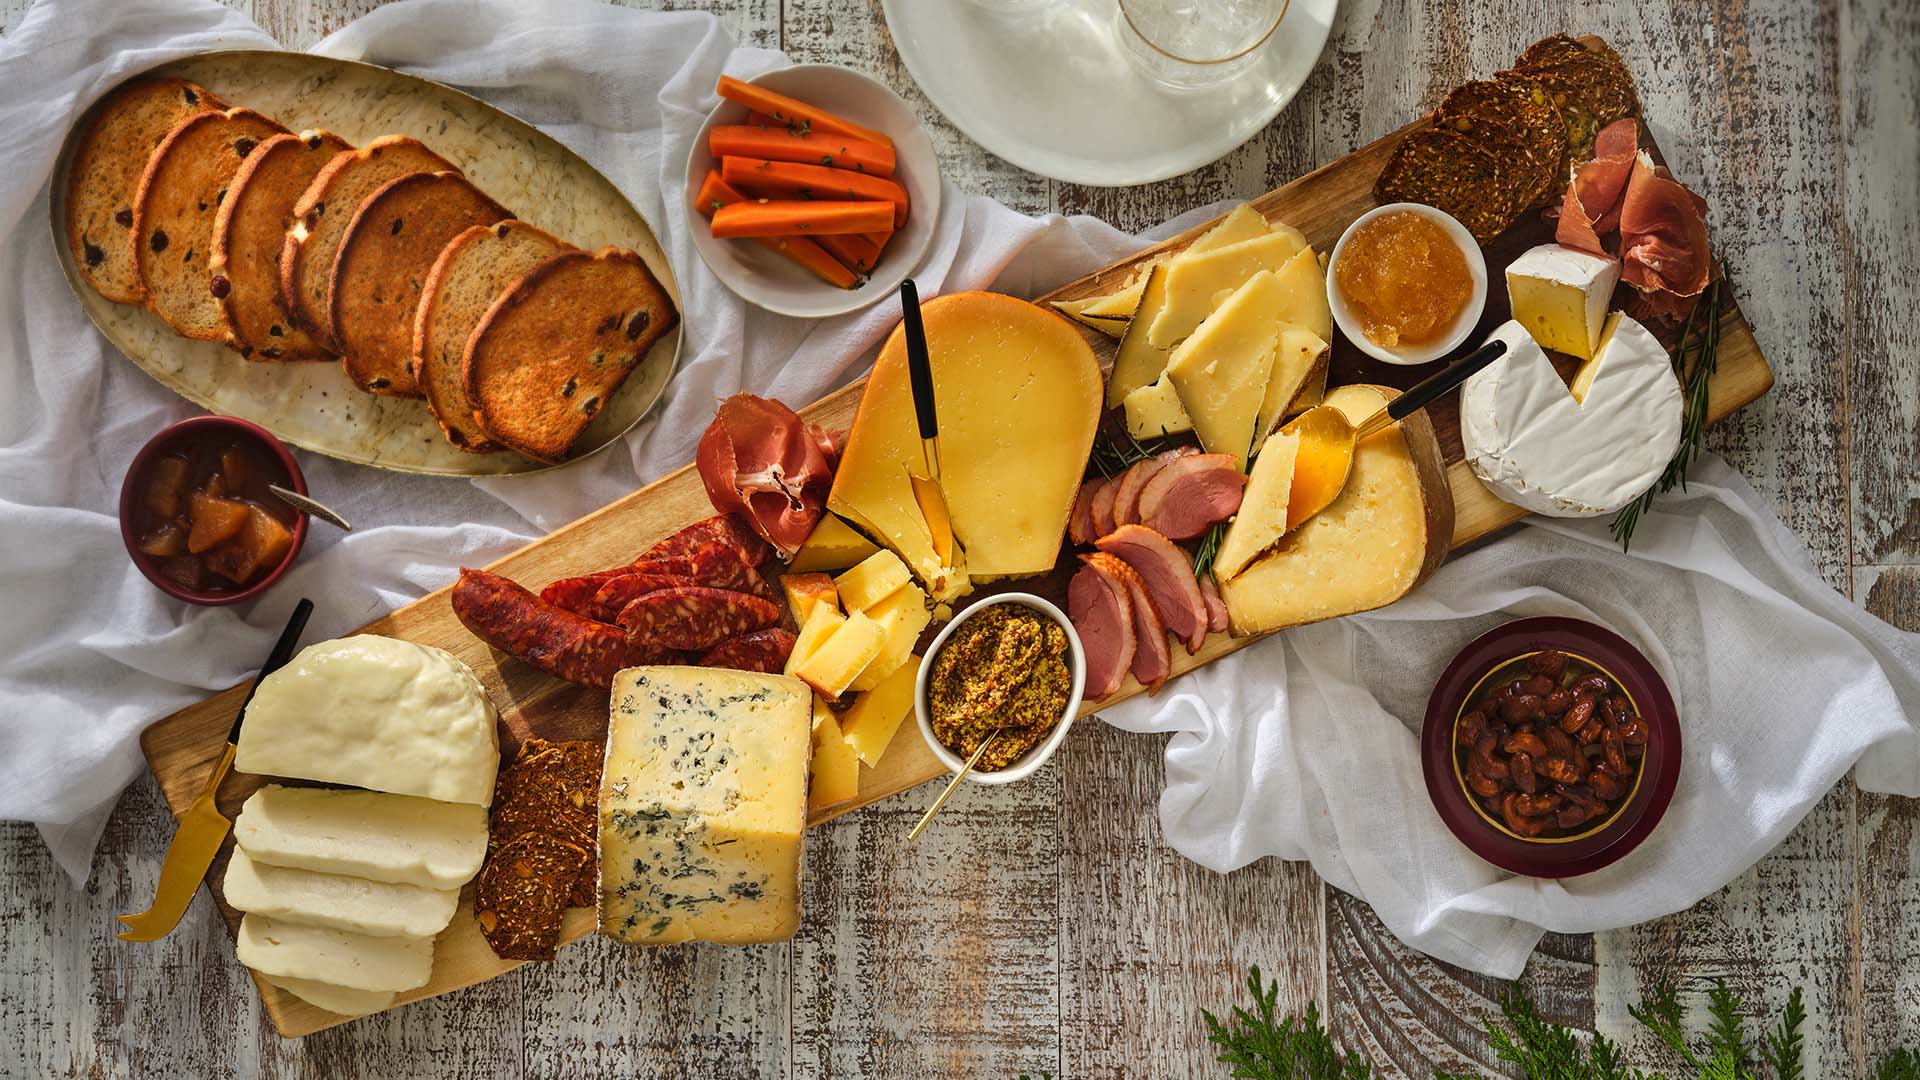 Overhead view of a cheese board with various types of artisanal cheeses, meats, and jelly and mustard spread.